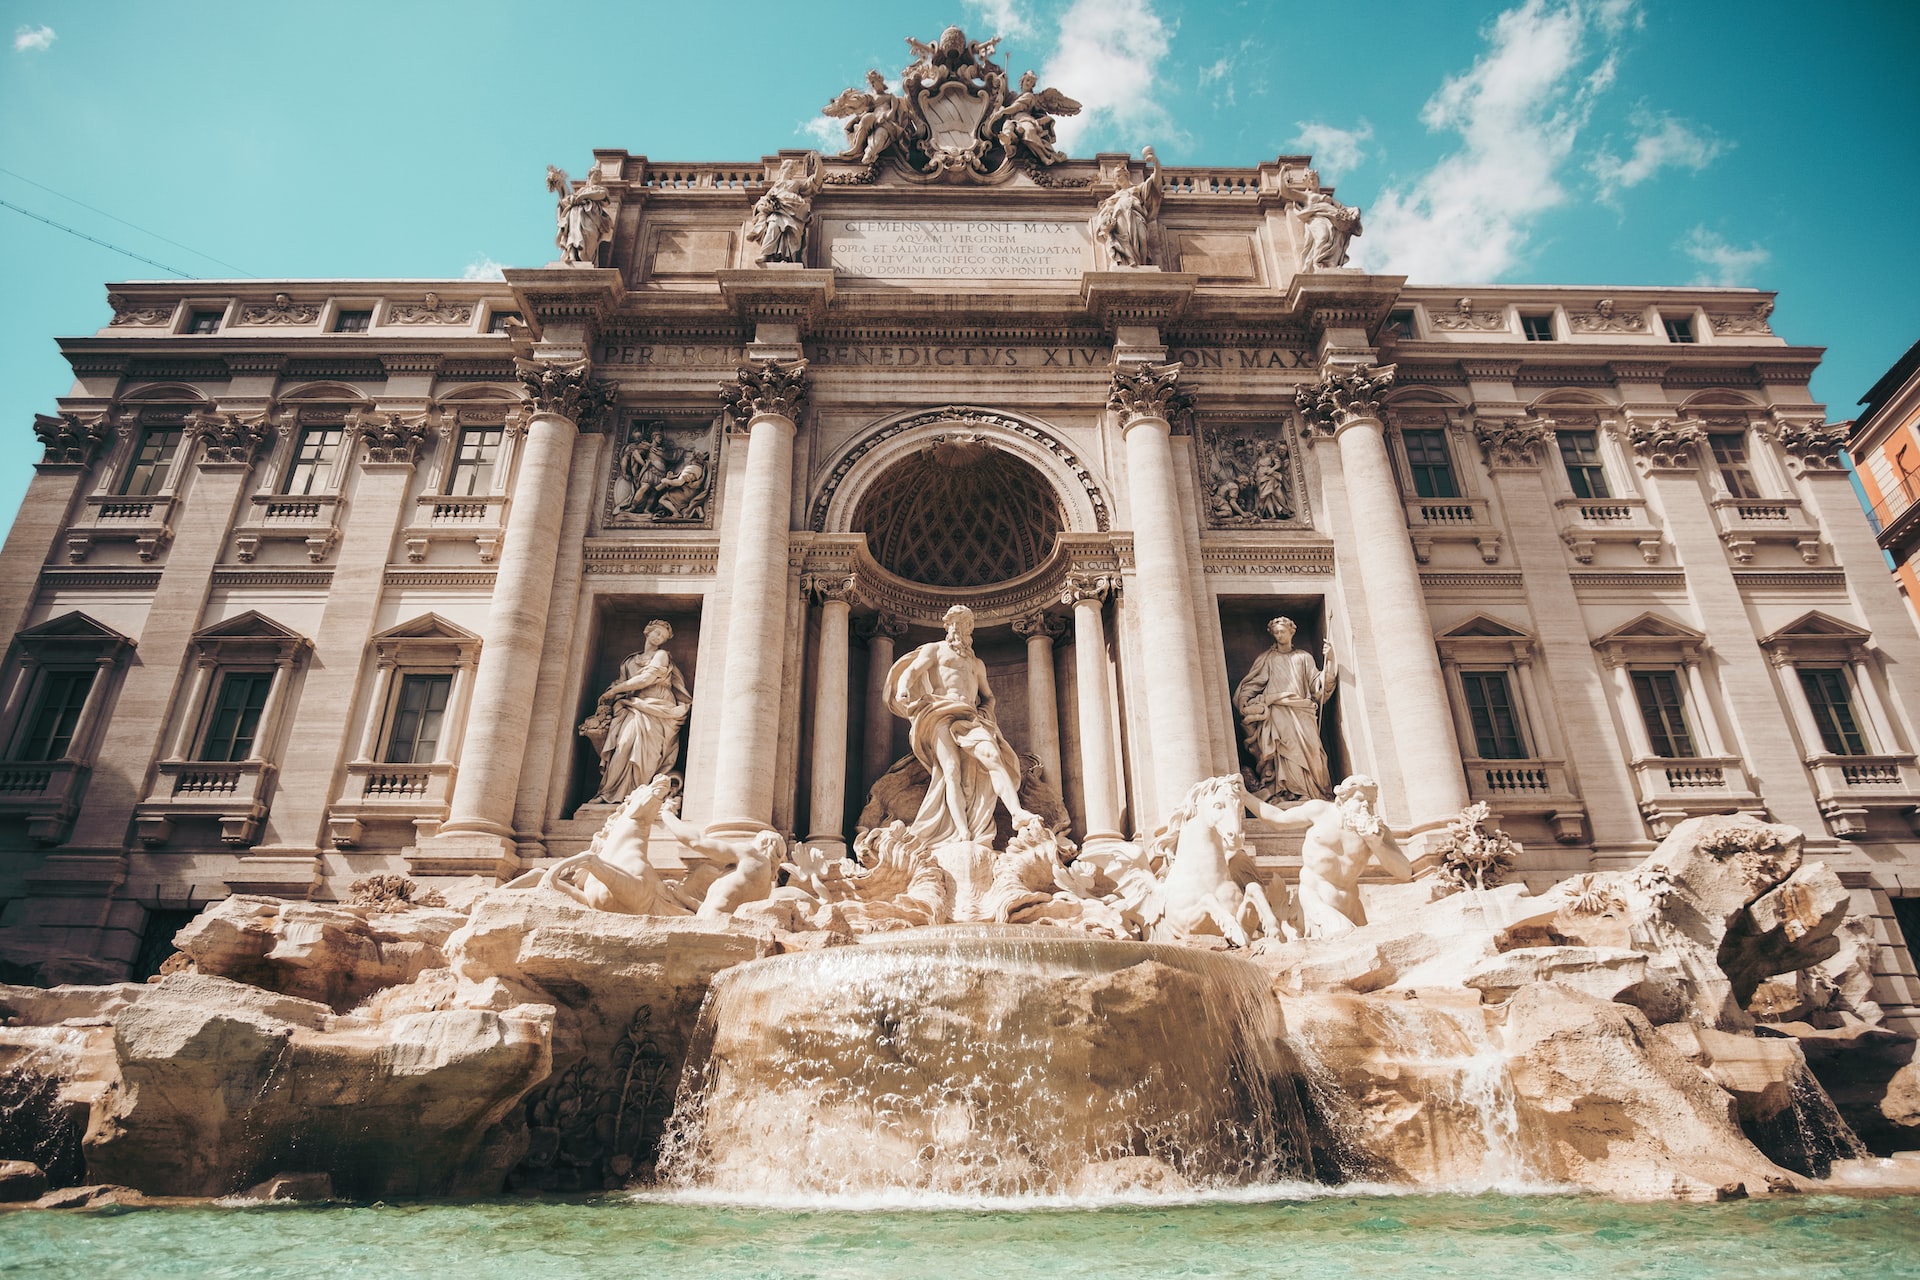 The Trevi Fountain, a well-known landmark in Rome

